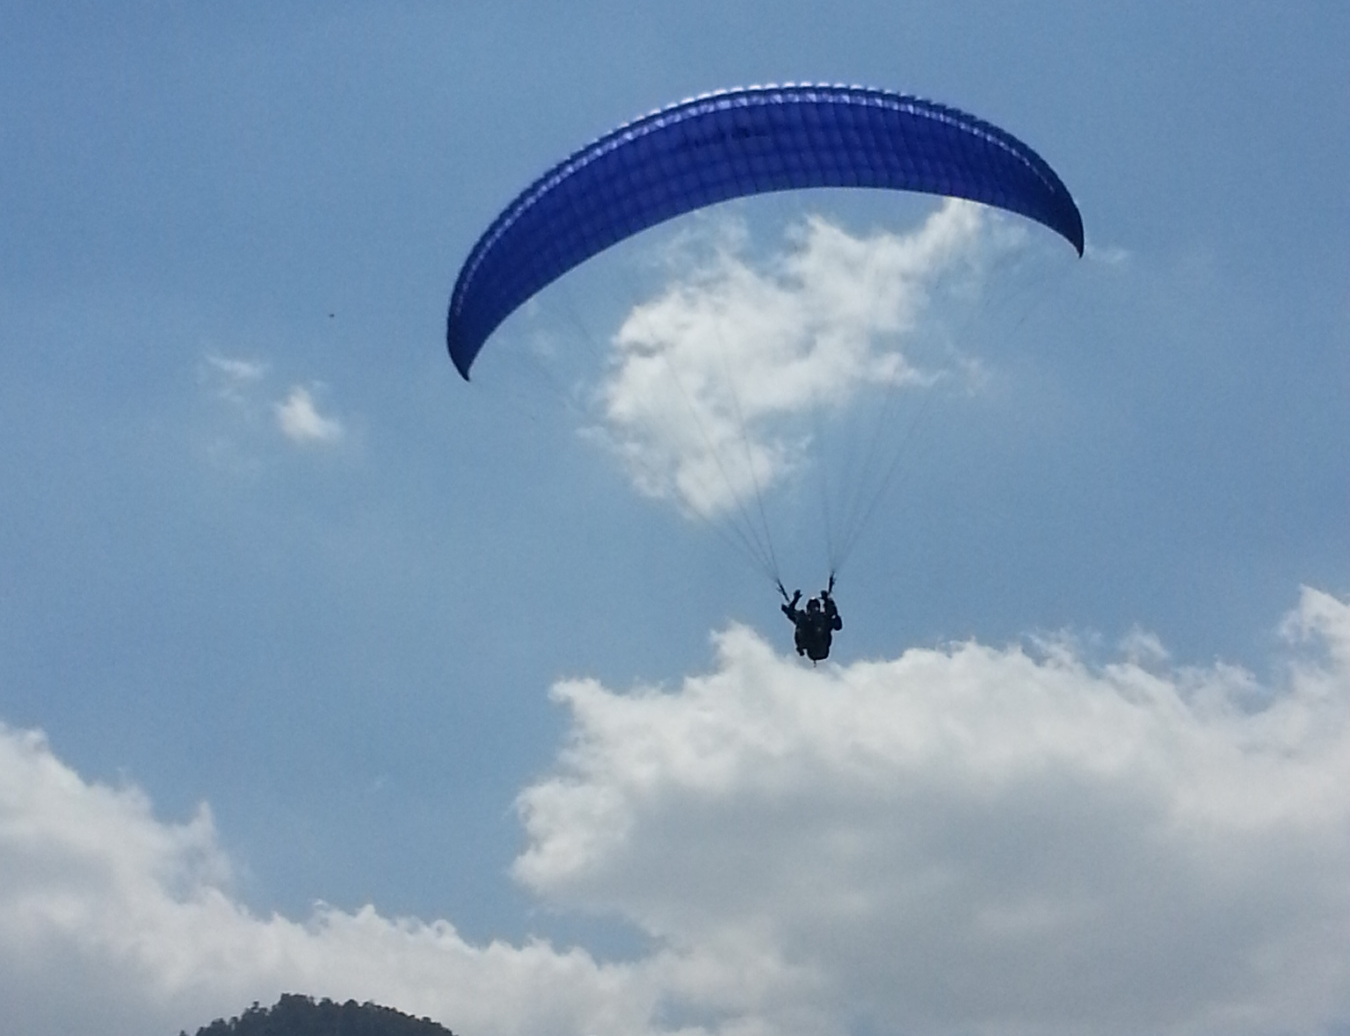 national sports competition Nepal, paragliding